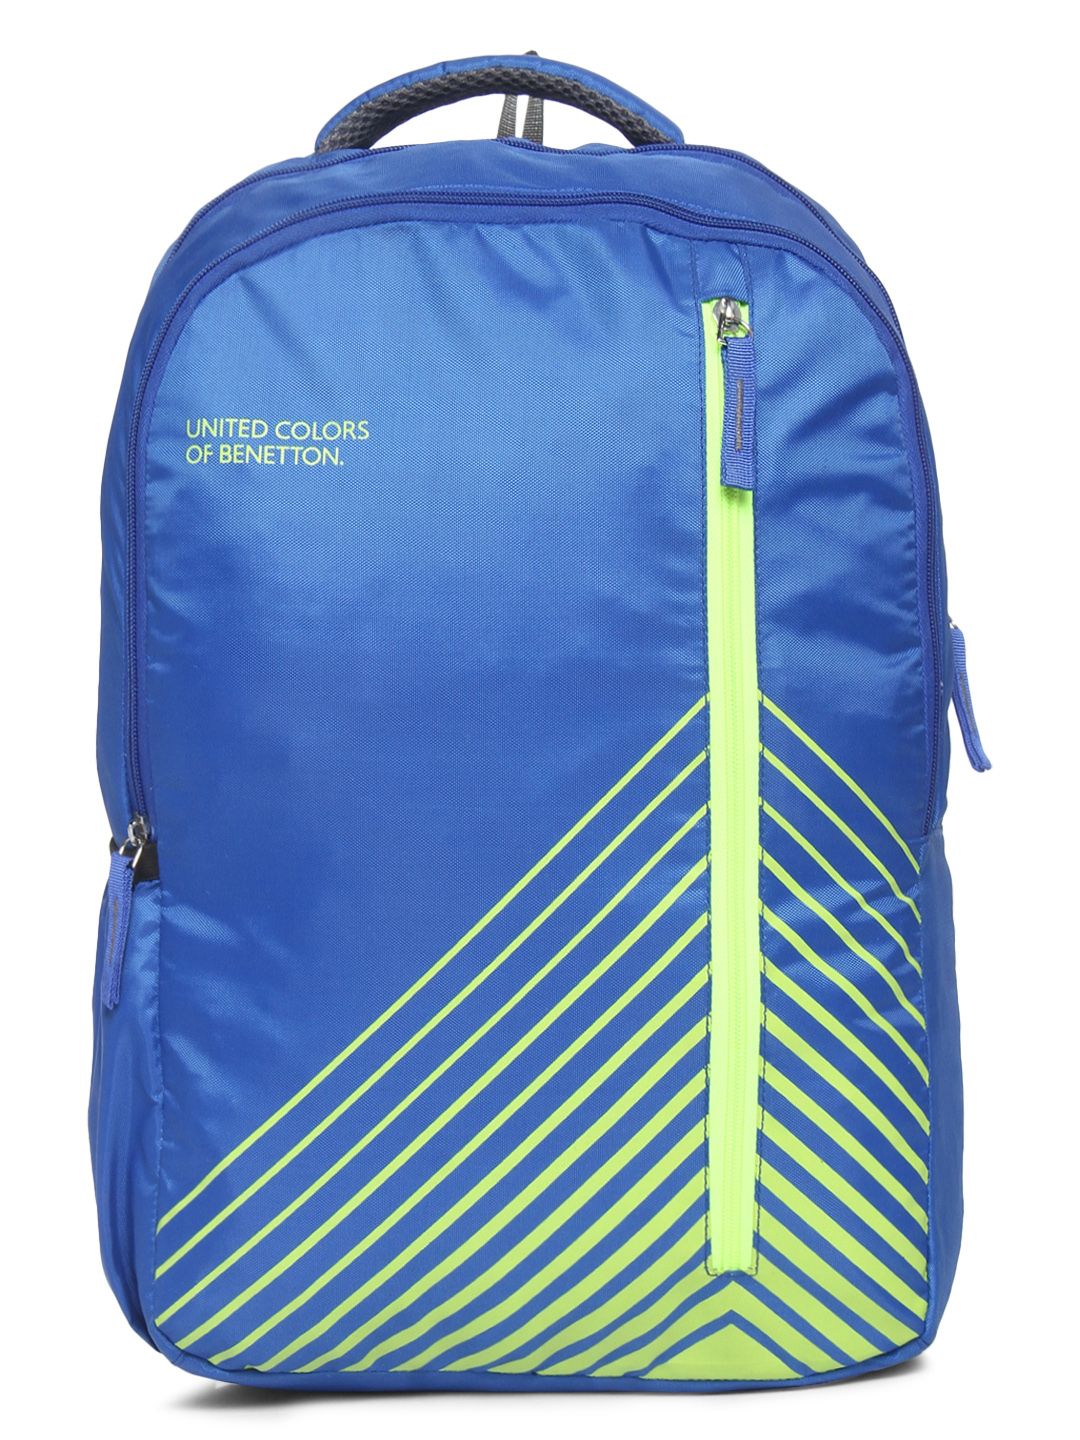 United Colors of Benetton Unisex Blue Graphic Backpack Price in India